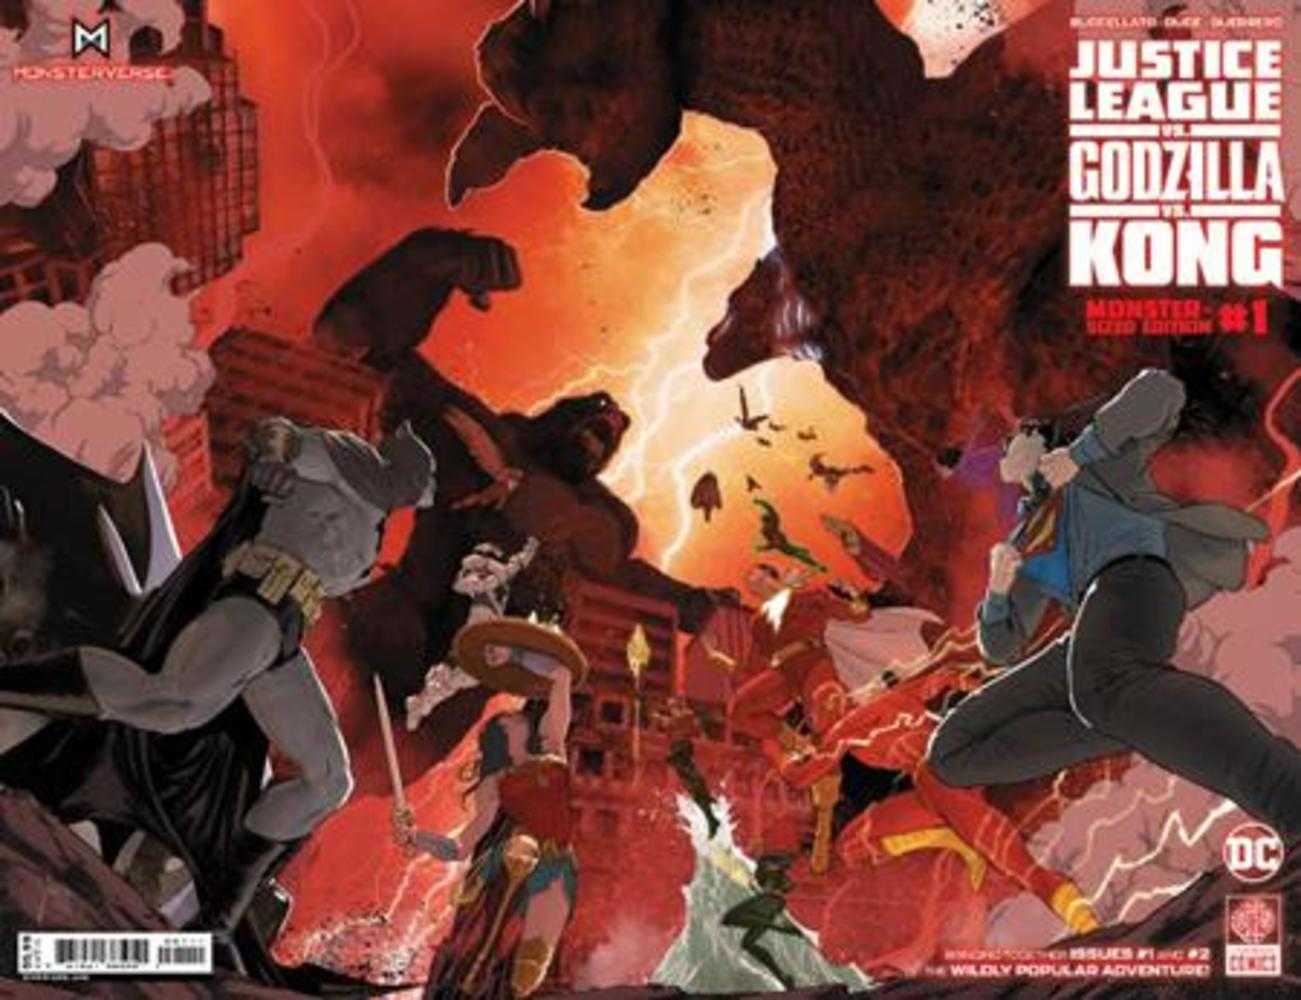 Justice League vs Godzilla vs Kong Monster-Sized Edition | Game Master's Emporium (The New GME)